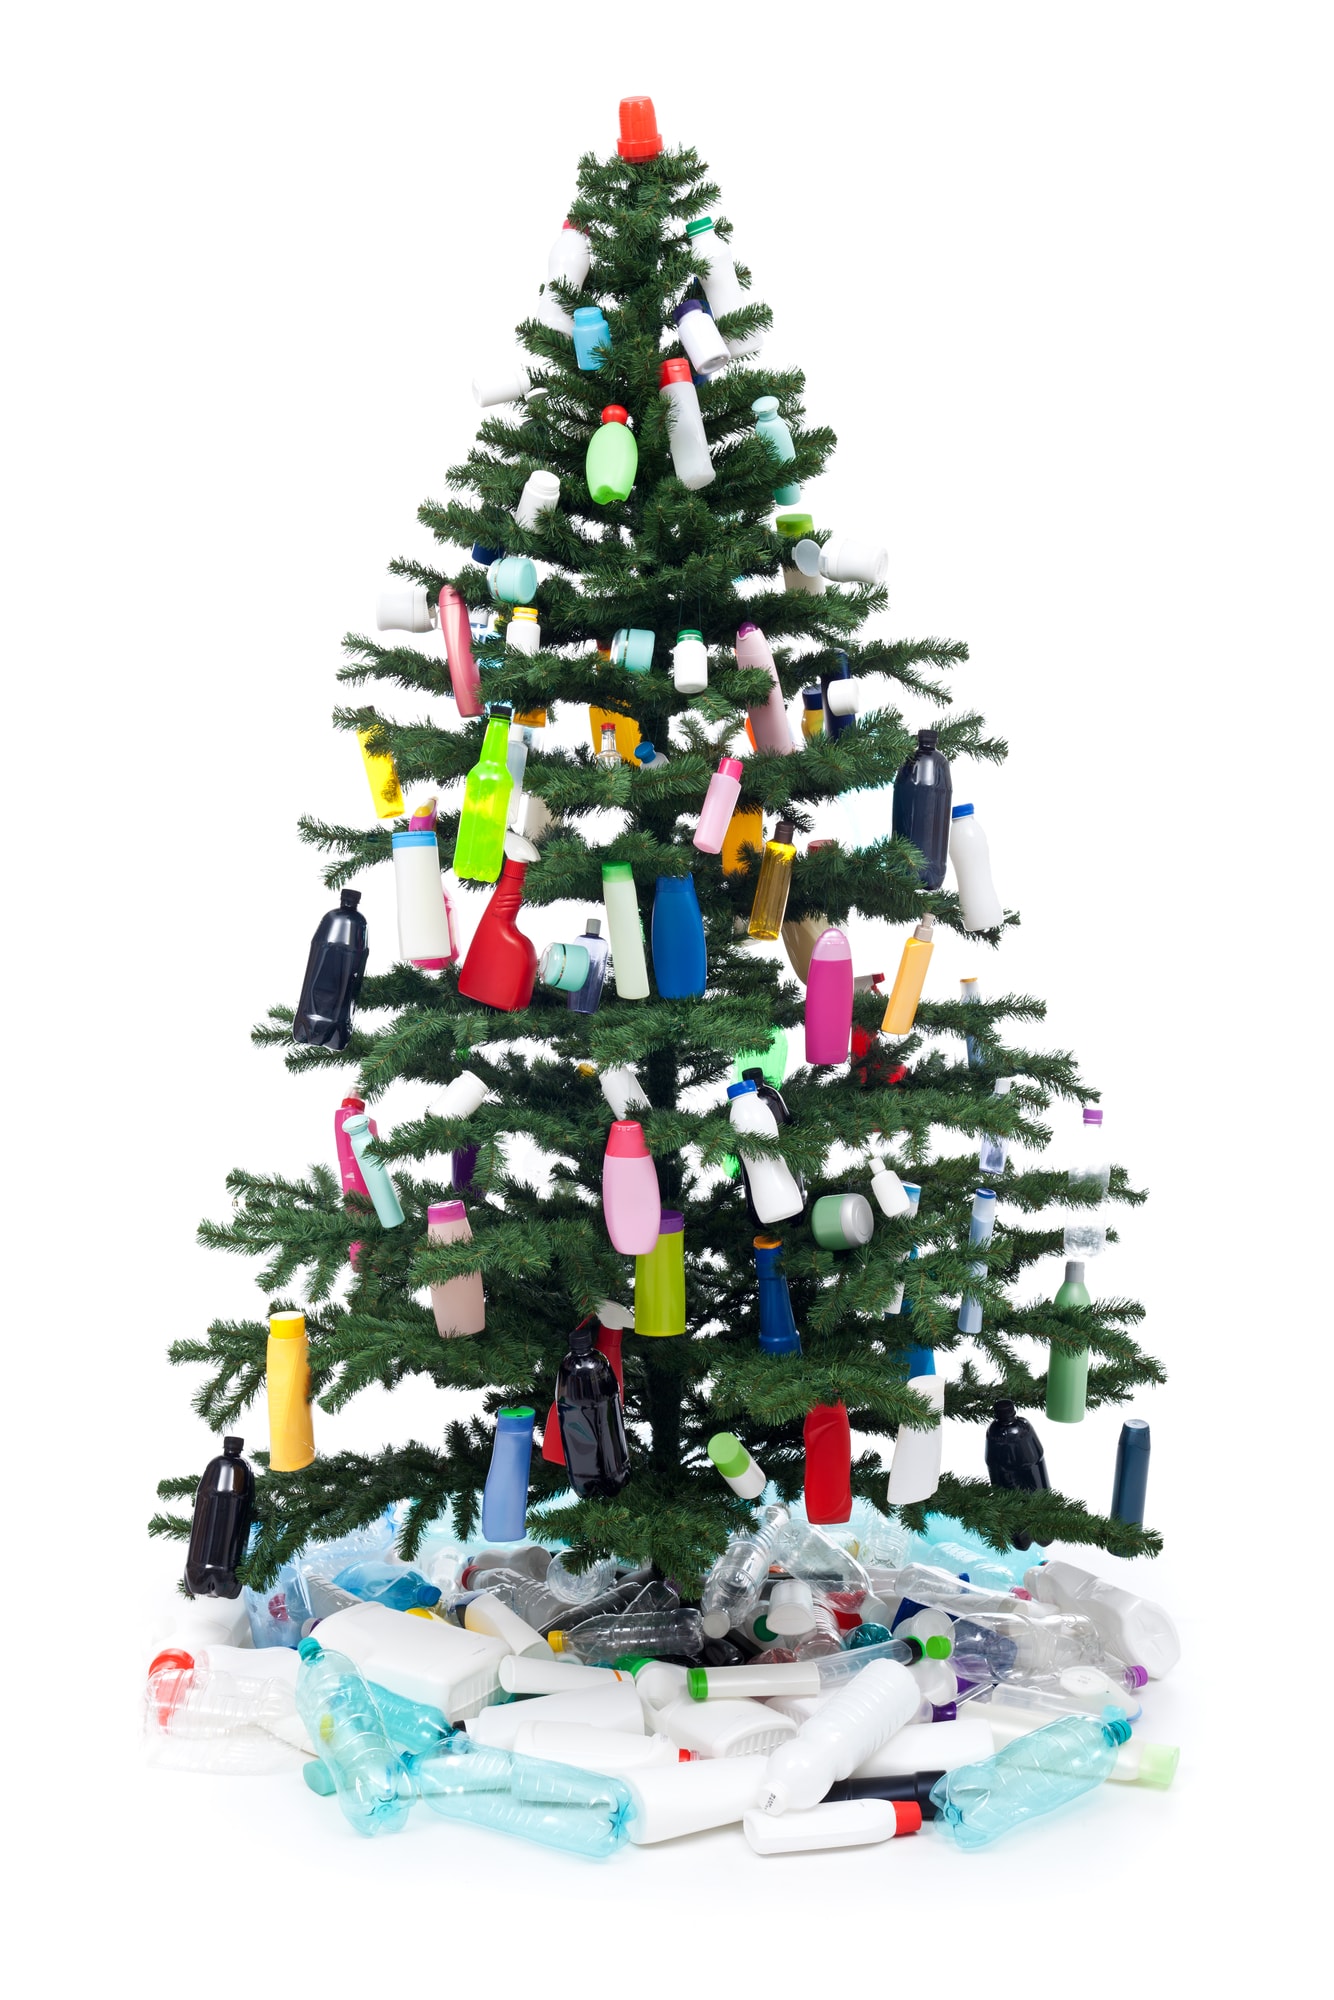 Plastic bottles waste decorating a christmas tree - environment concept